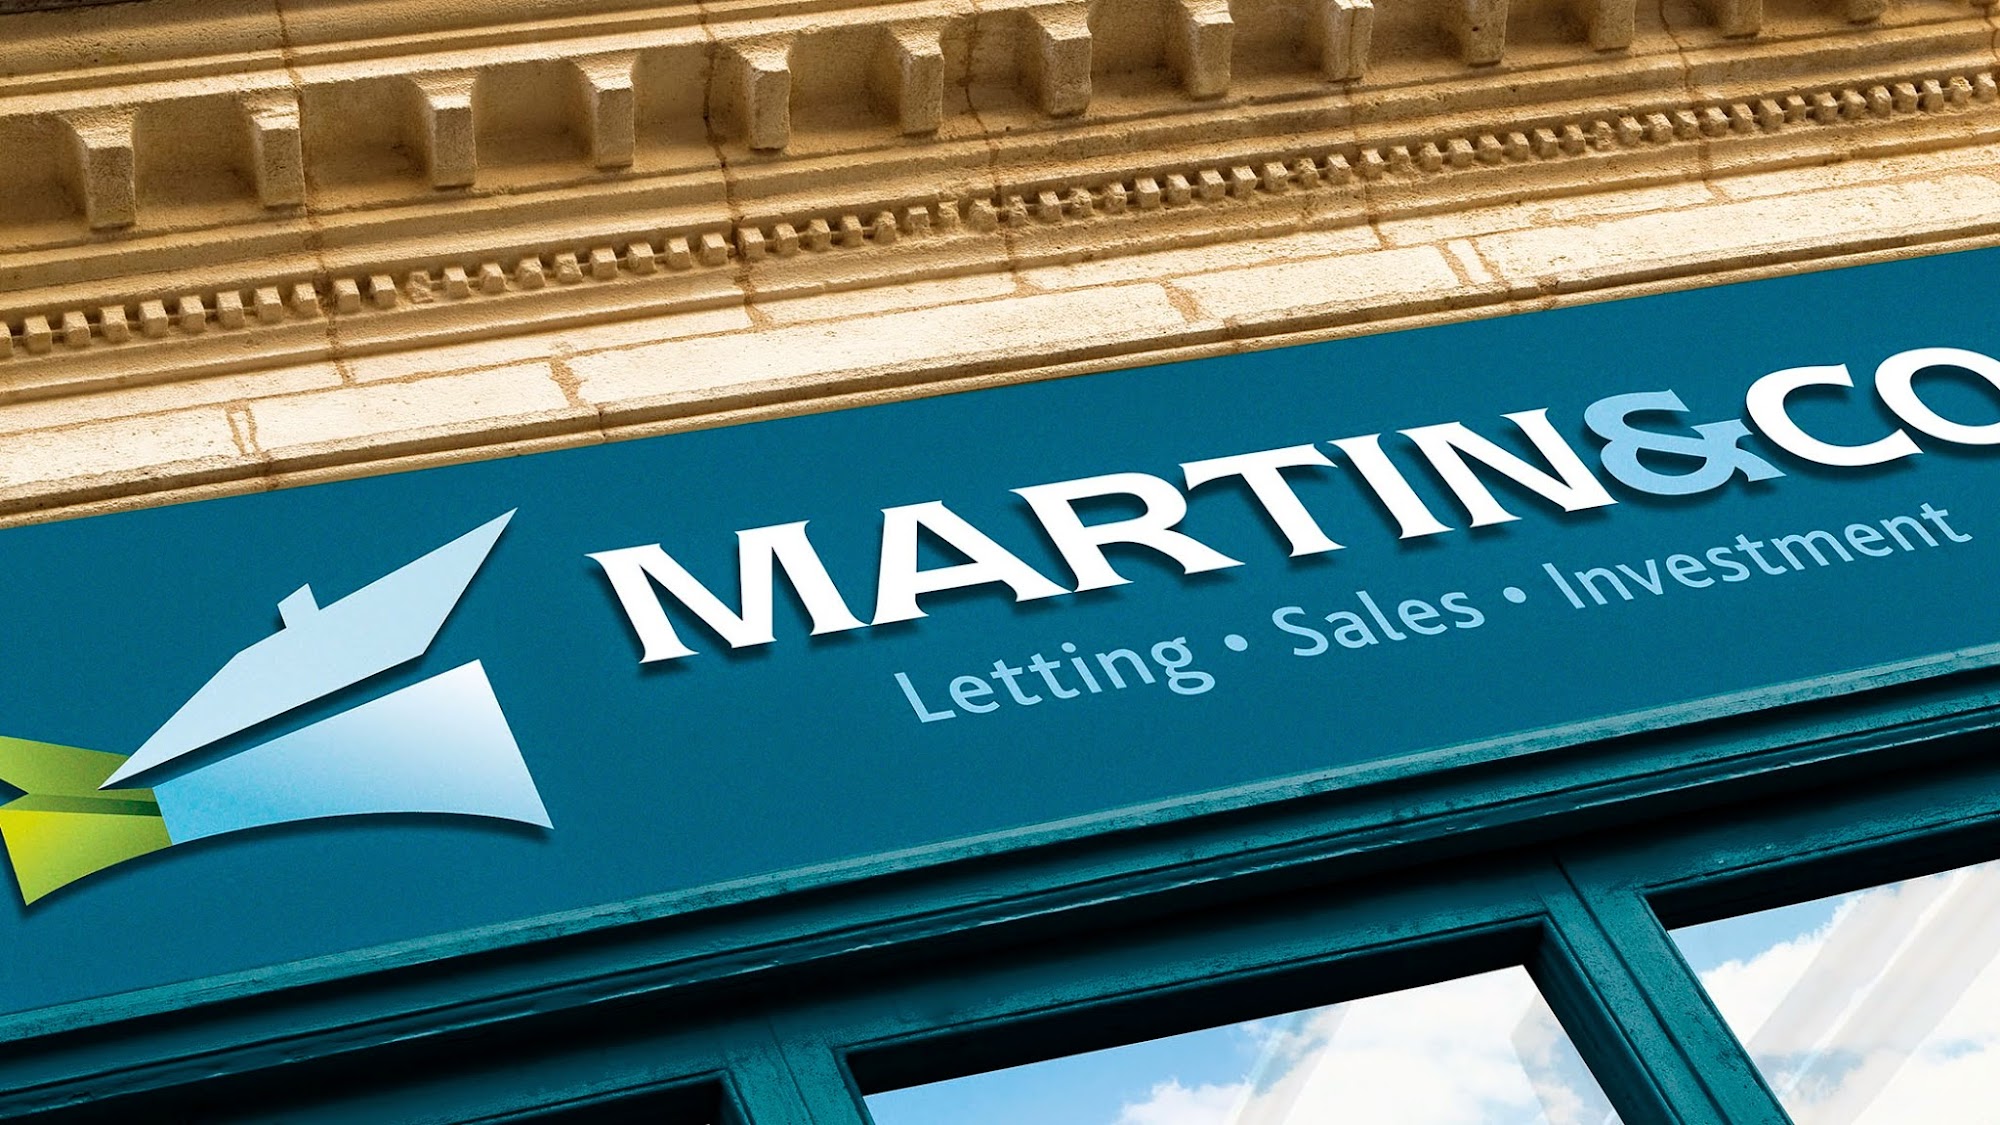 Martin & Co Slough Lettings & Estate Agents